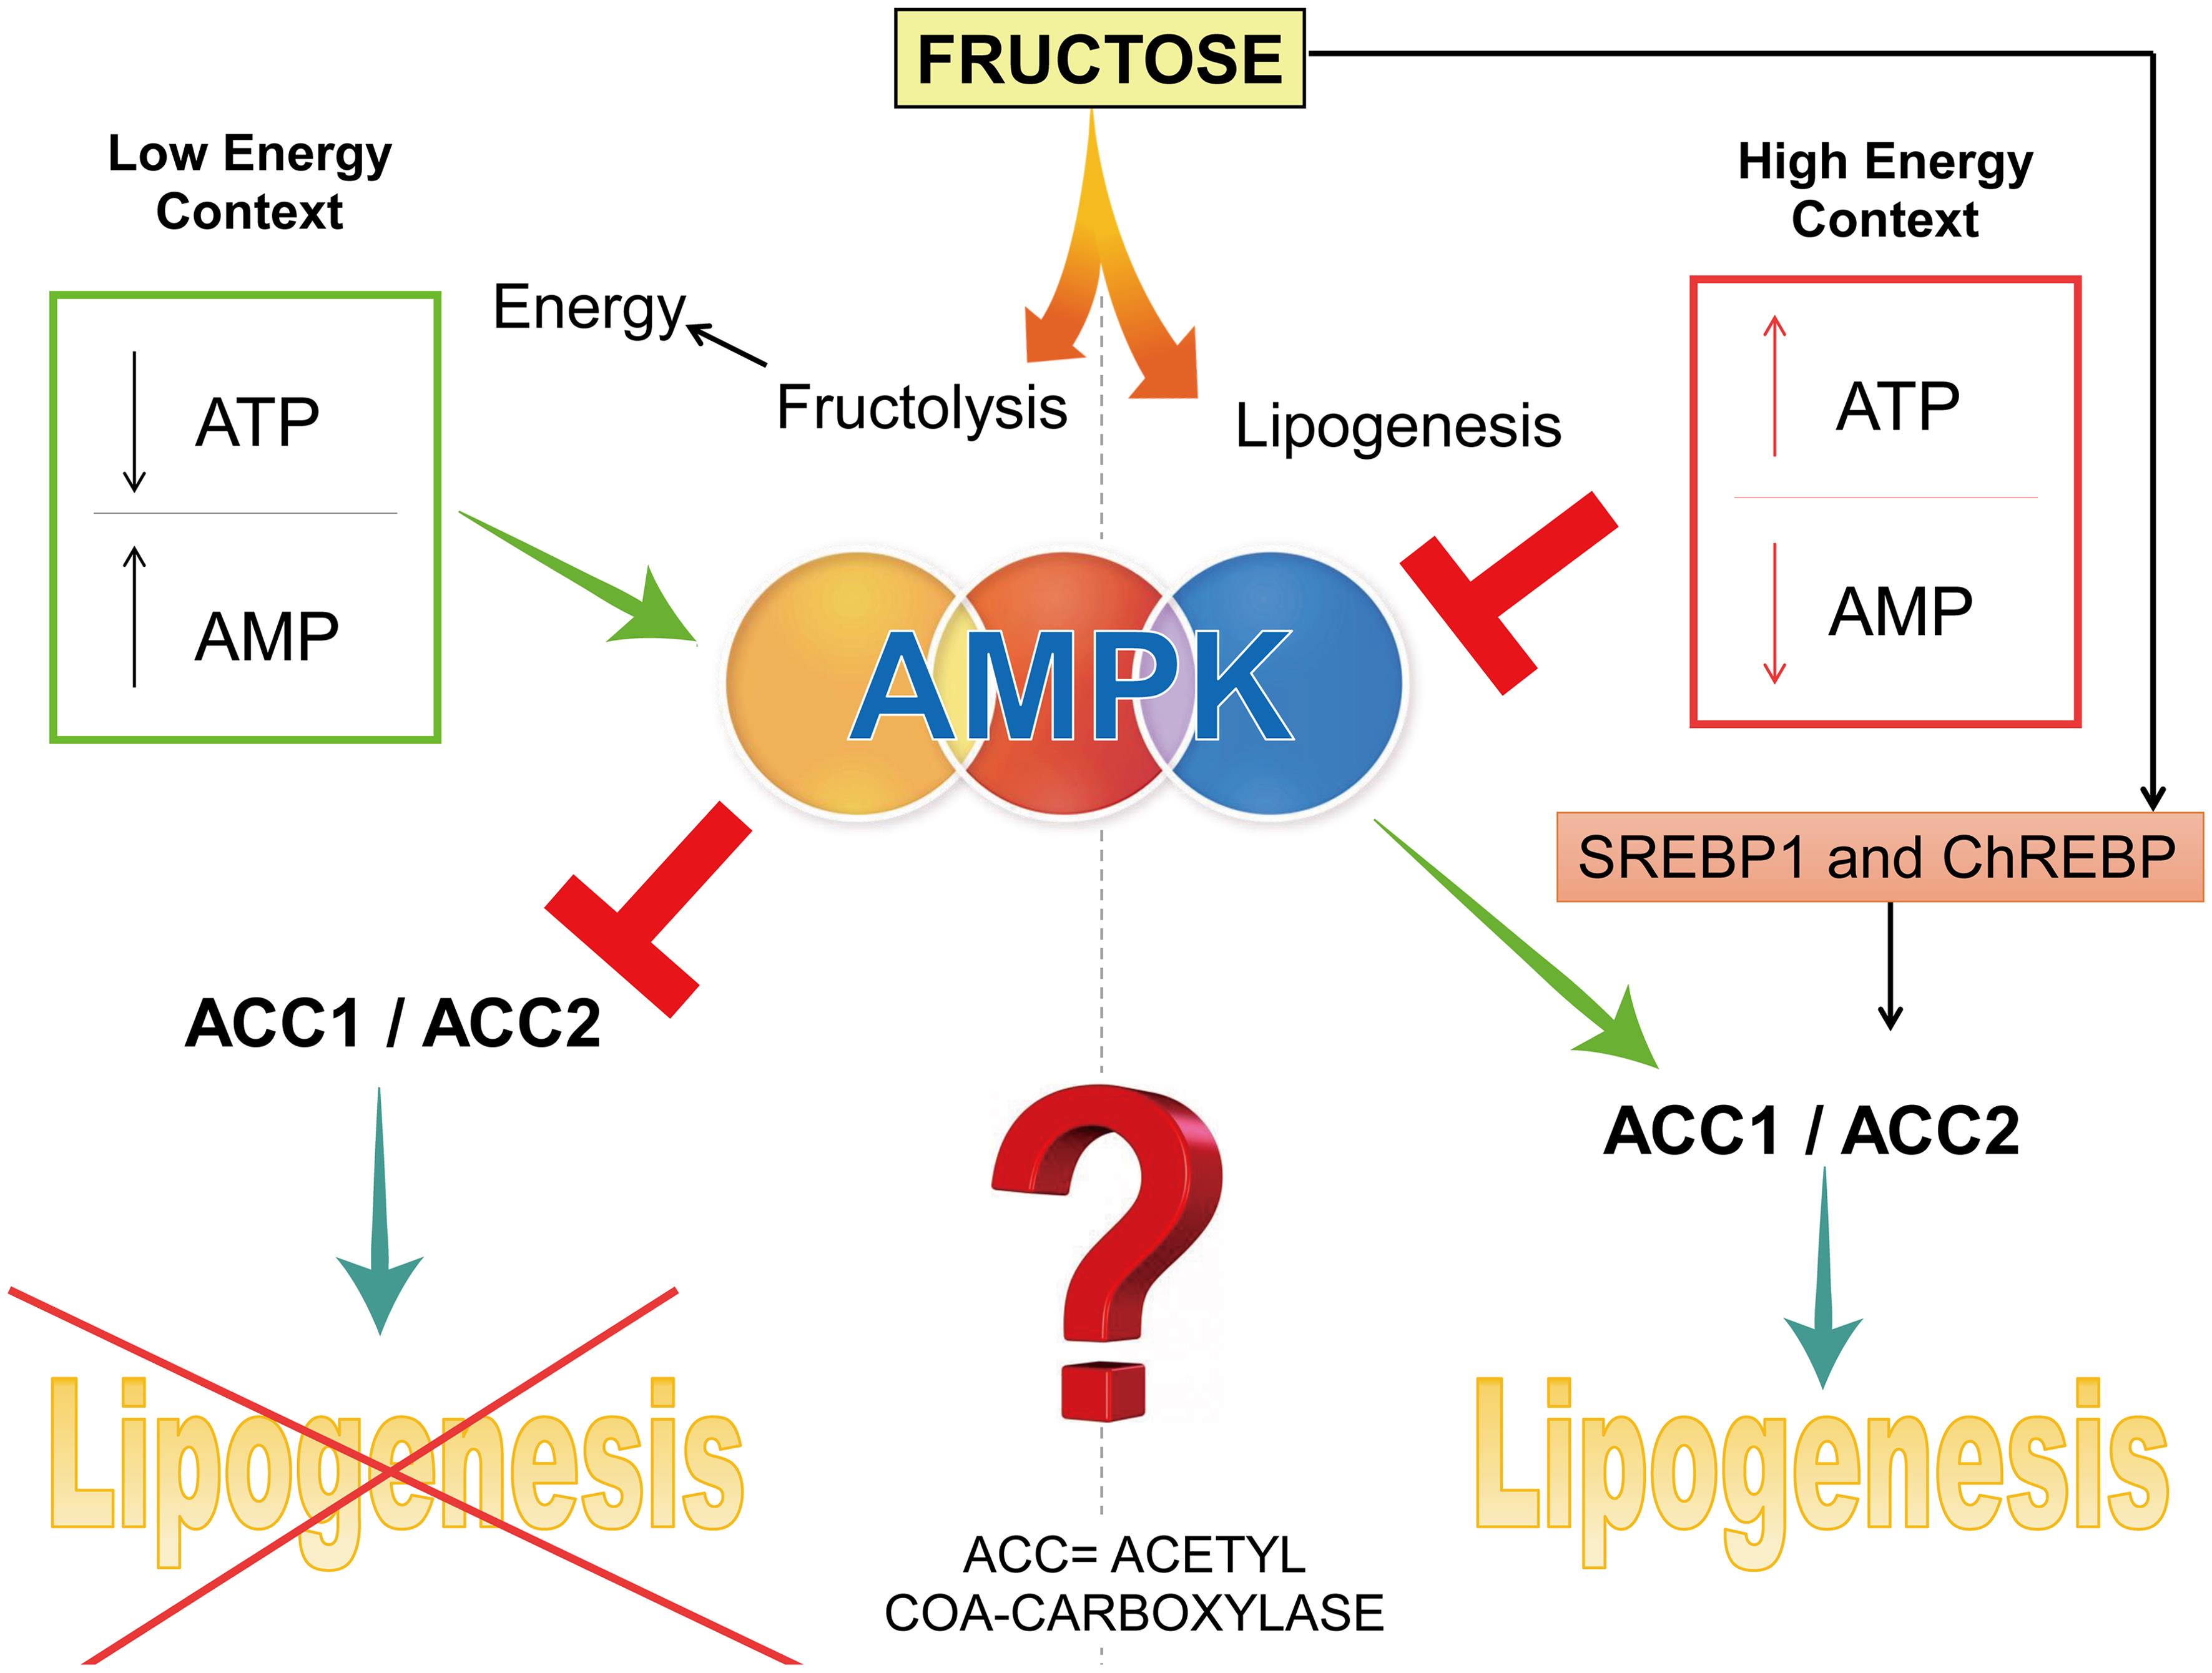 Possible relationships between high fructose intake, insulin resistance, obesity, metabolic syndrome, lipogenic phenotype, and cancer.